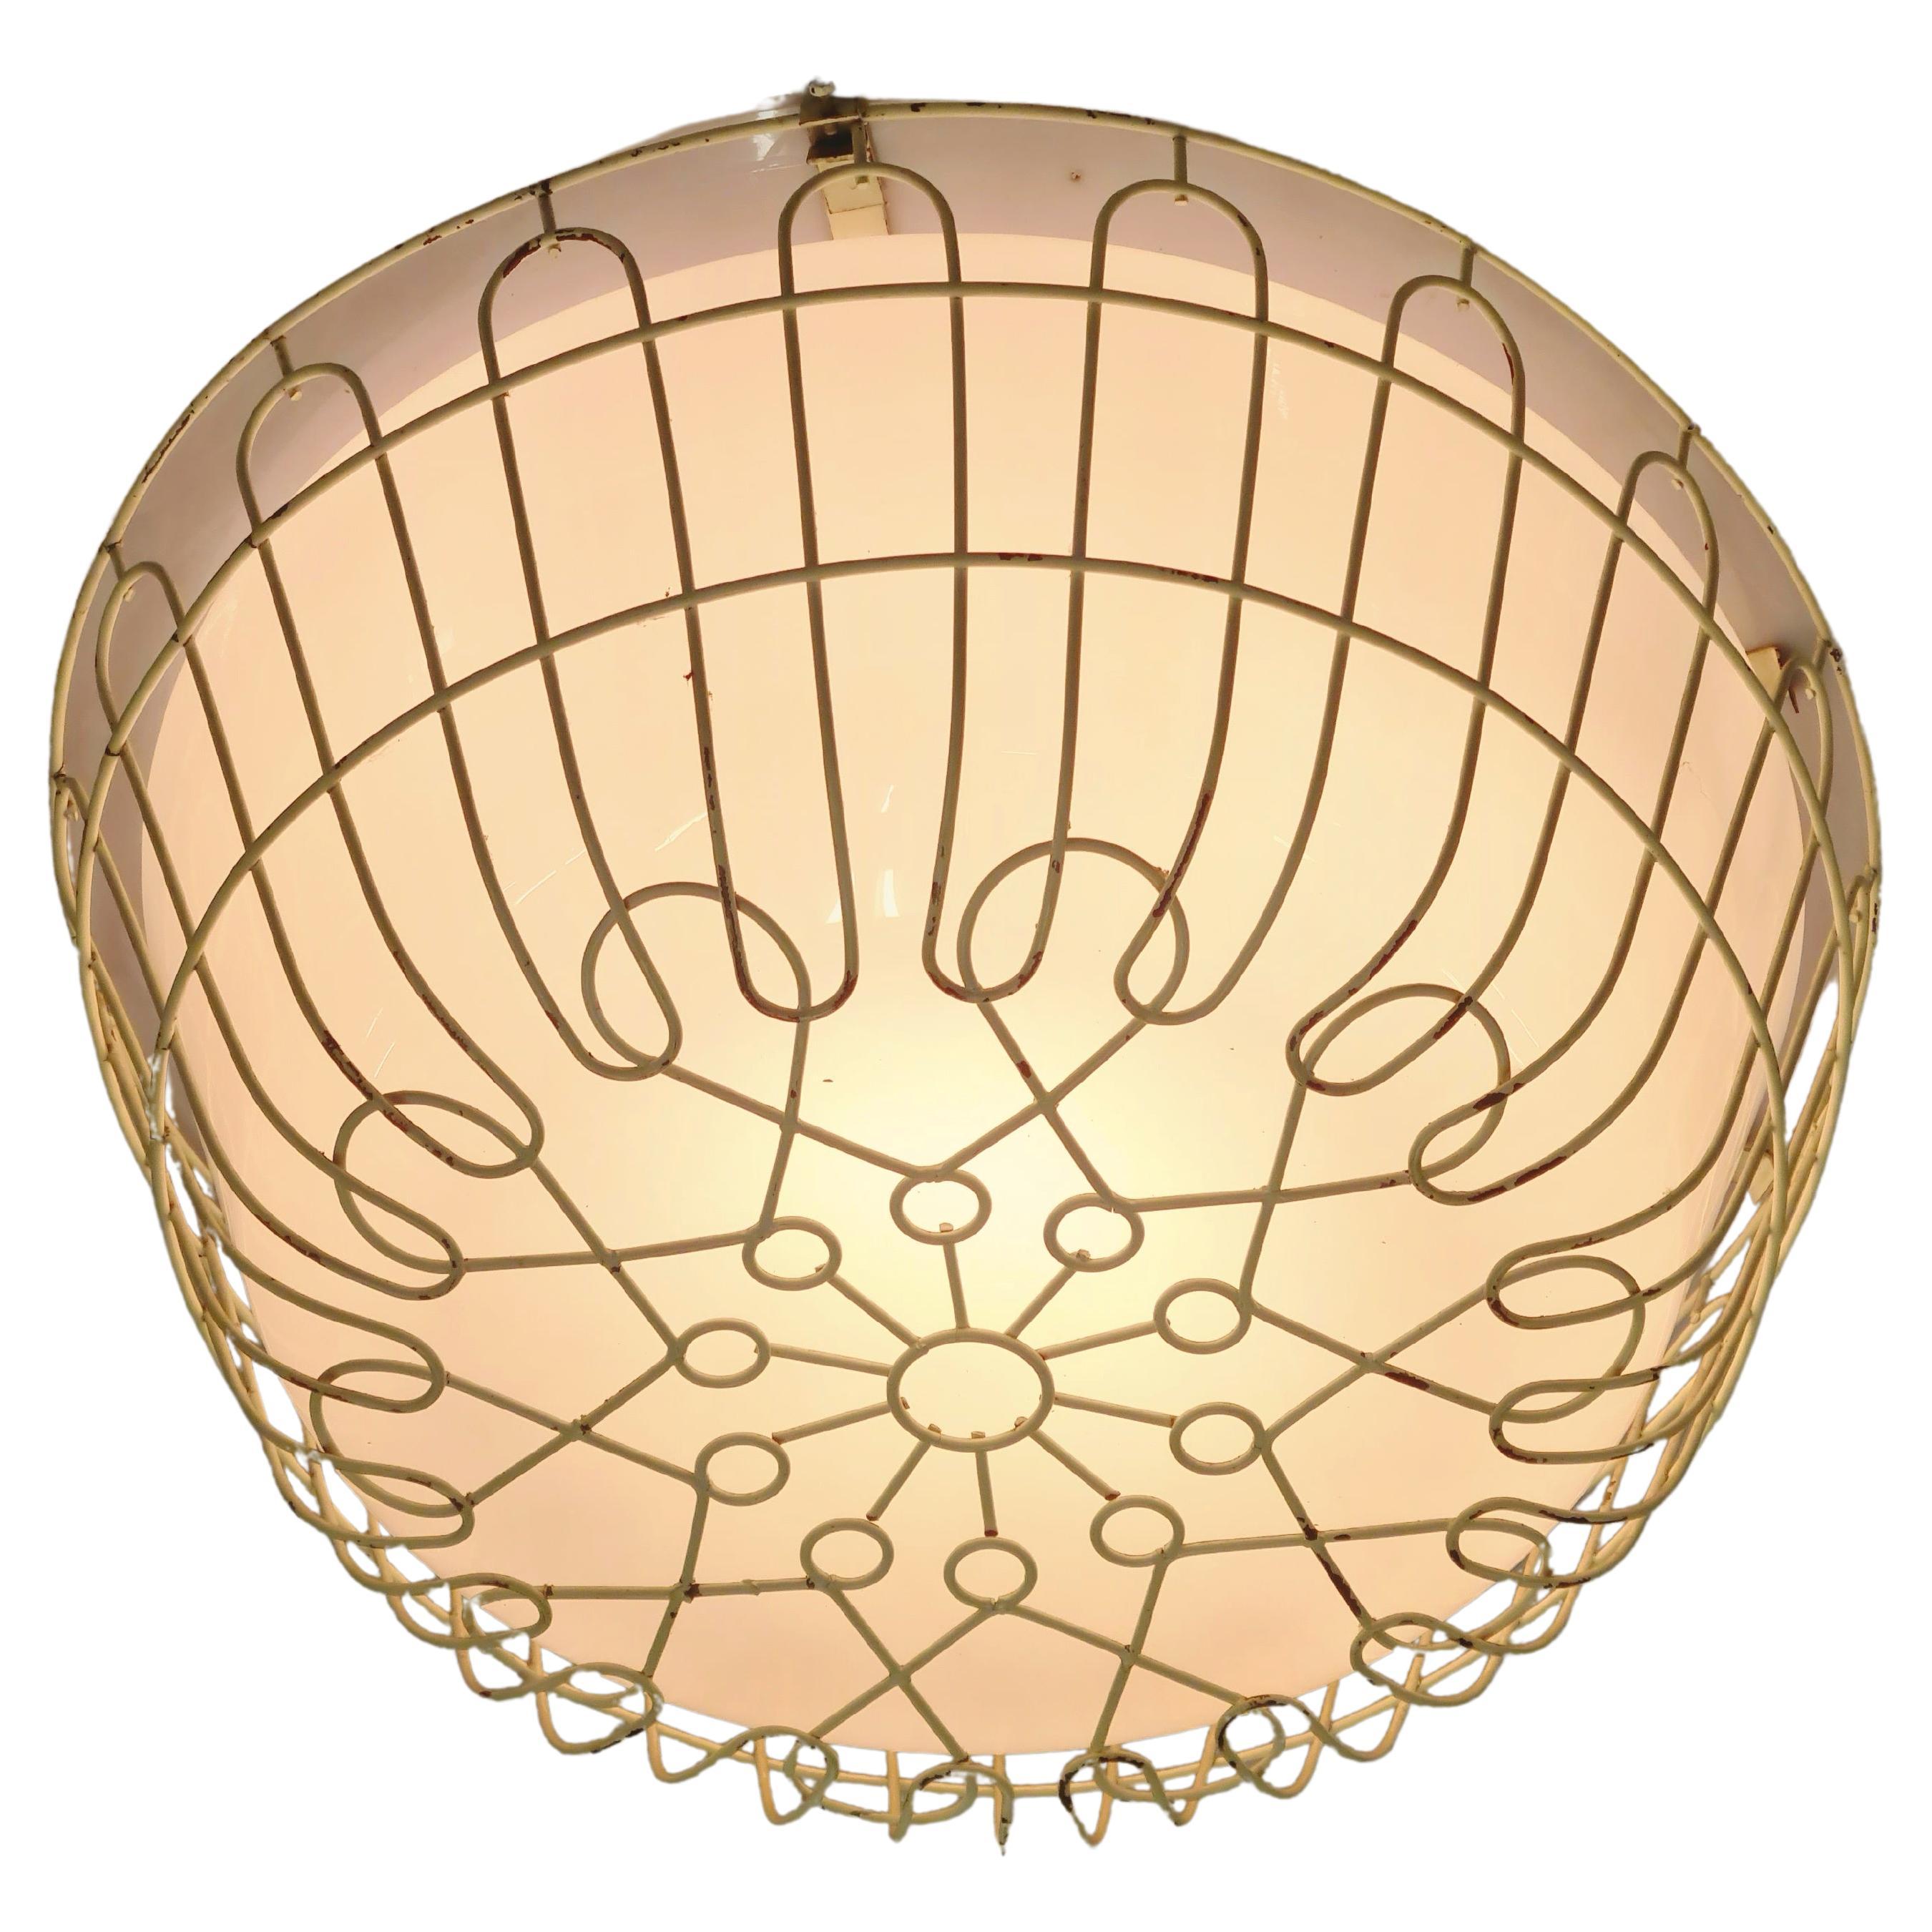 A Beautiful and Lively Lisa Johansson-Papé Ceiling Lamp Model 71-115, Orno 1950s For Sale